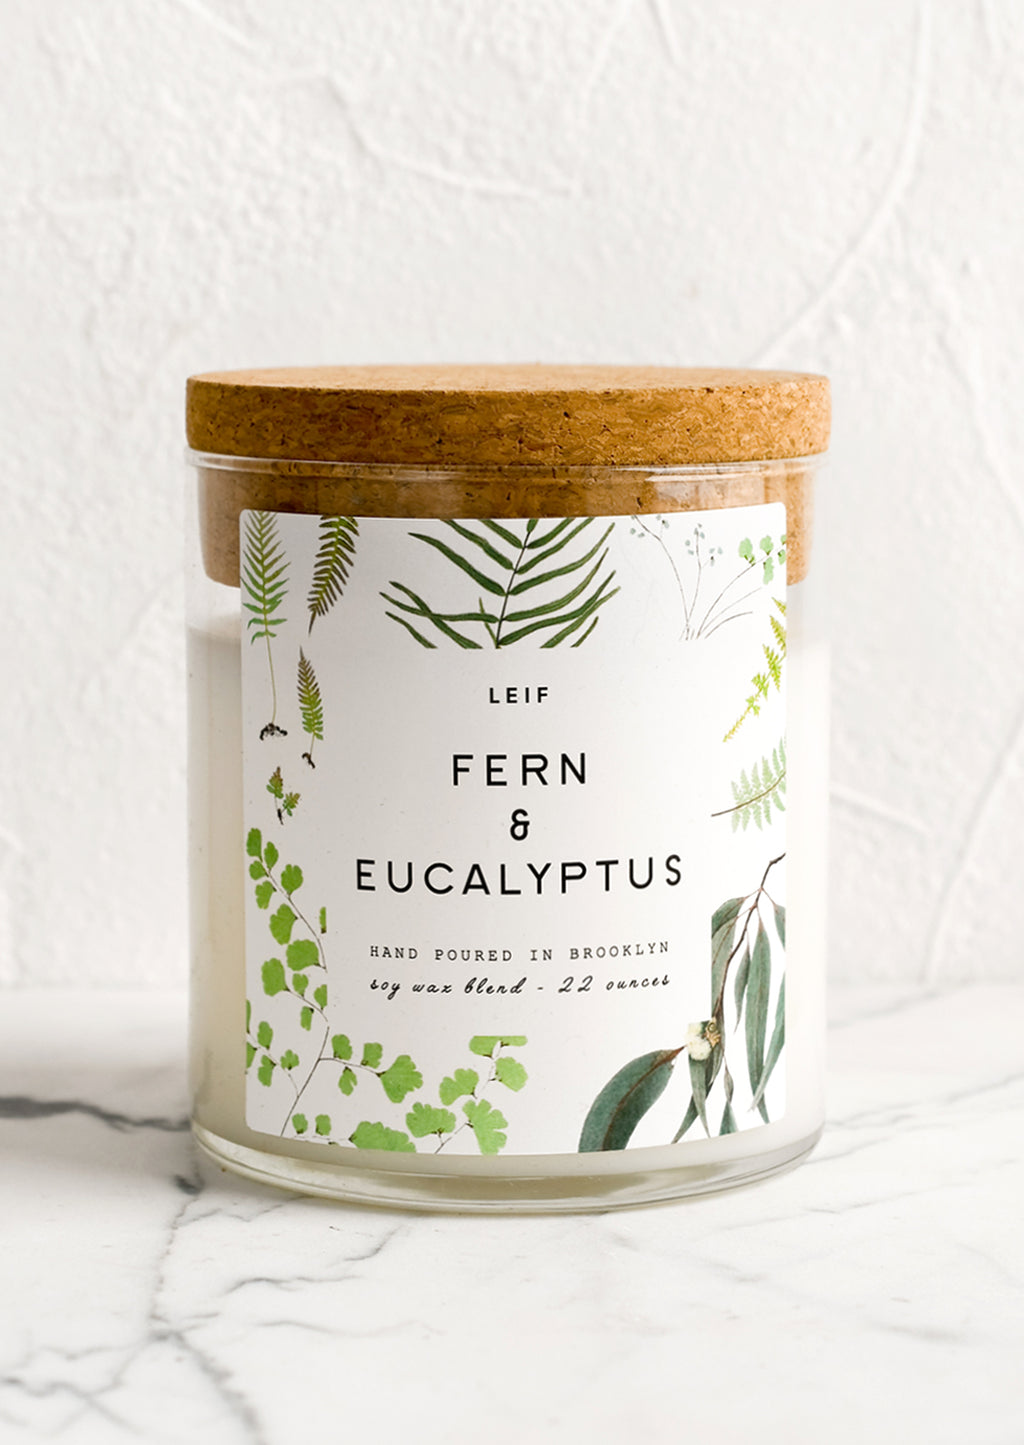 Fern & Eucalyptus: A glass candle with a cork lid and white botanical printed label reading "fern and eucalyptus".